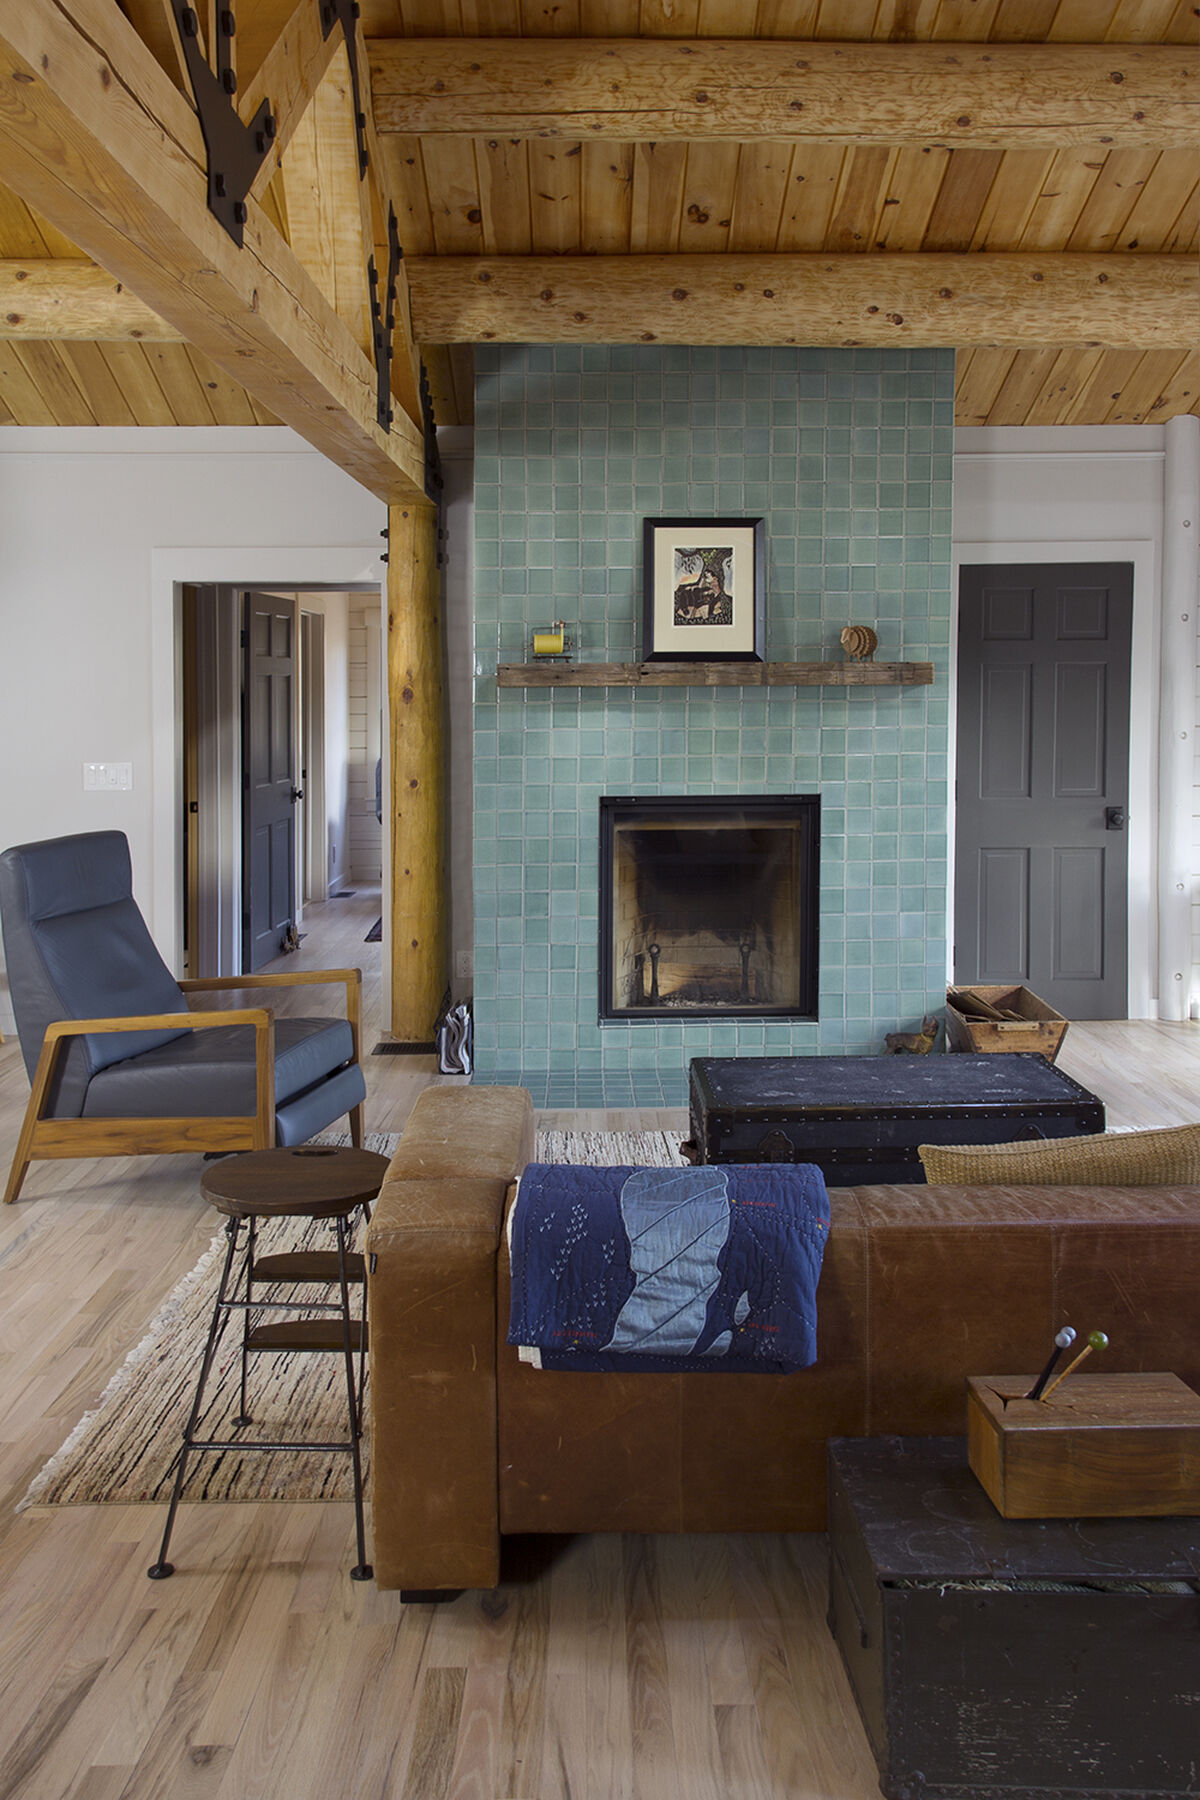 Ceramic Tiles Floor to Ceiling Fireplace